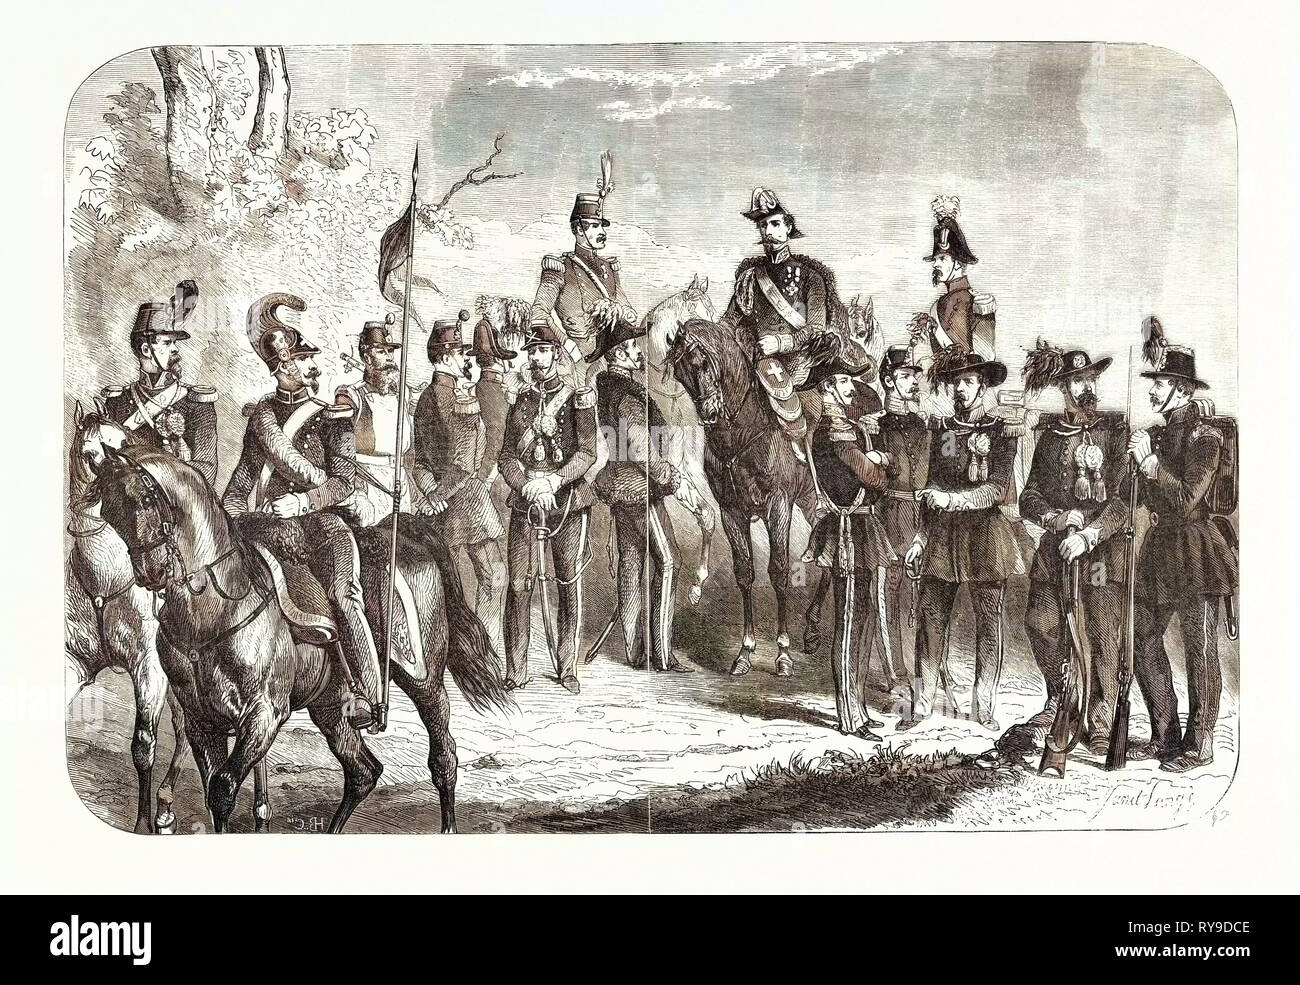 Uniforms of the Army of Sarde. Cavalry. Dragon-Lancer. Sapper. Offic. of Reg. of Savoy. Offic. Artillery. Staff. Off. Staff, Guards of Sardinia and the Bersaglieri. Rifleman Gendarme. General. Colonel. Policeman on Foot. Engraving 1855 Stock Photo